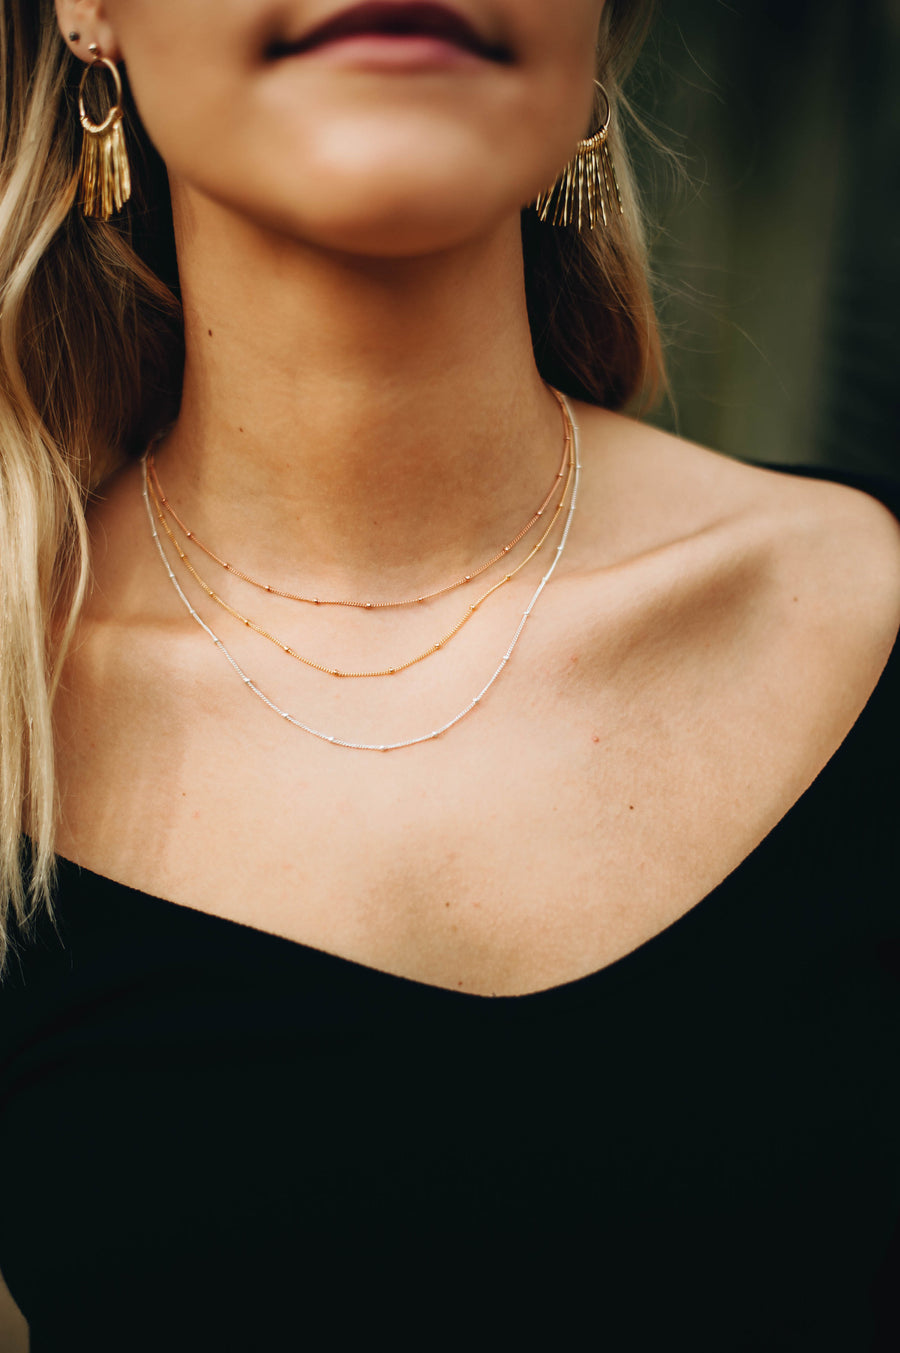 ARIA Set Pearl Drop Necklace and Simple Chain Necklace Set Tiny Freshwater  Drop Pearl Necklace Basic Thin Chain Layered Necklace 